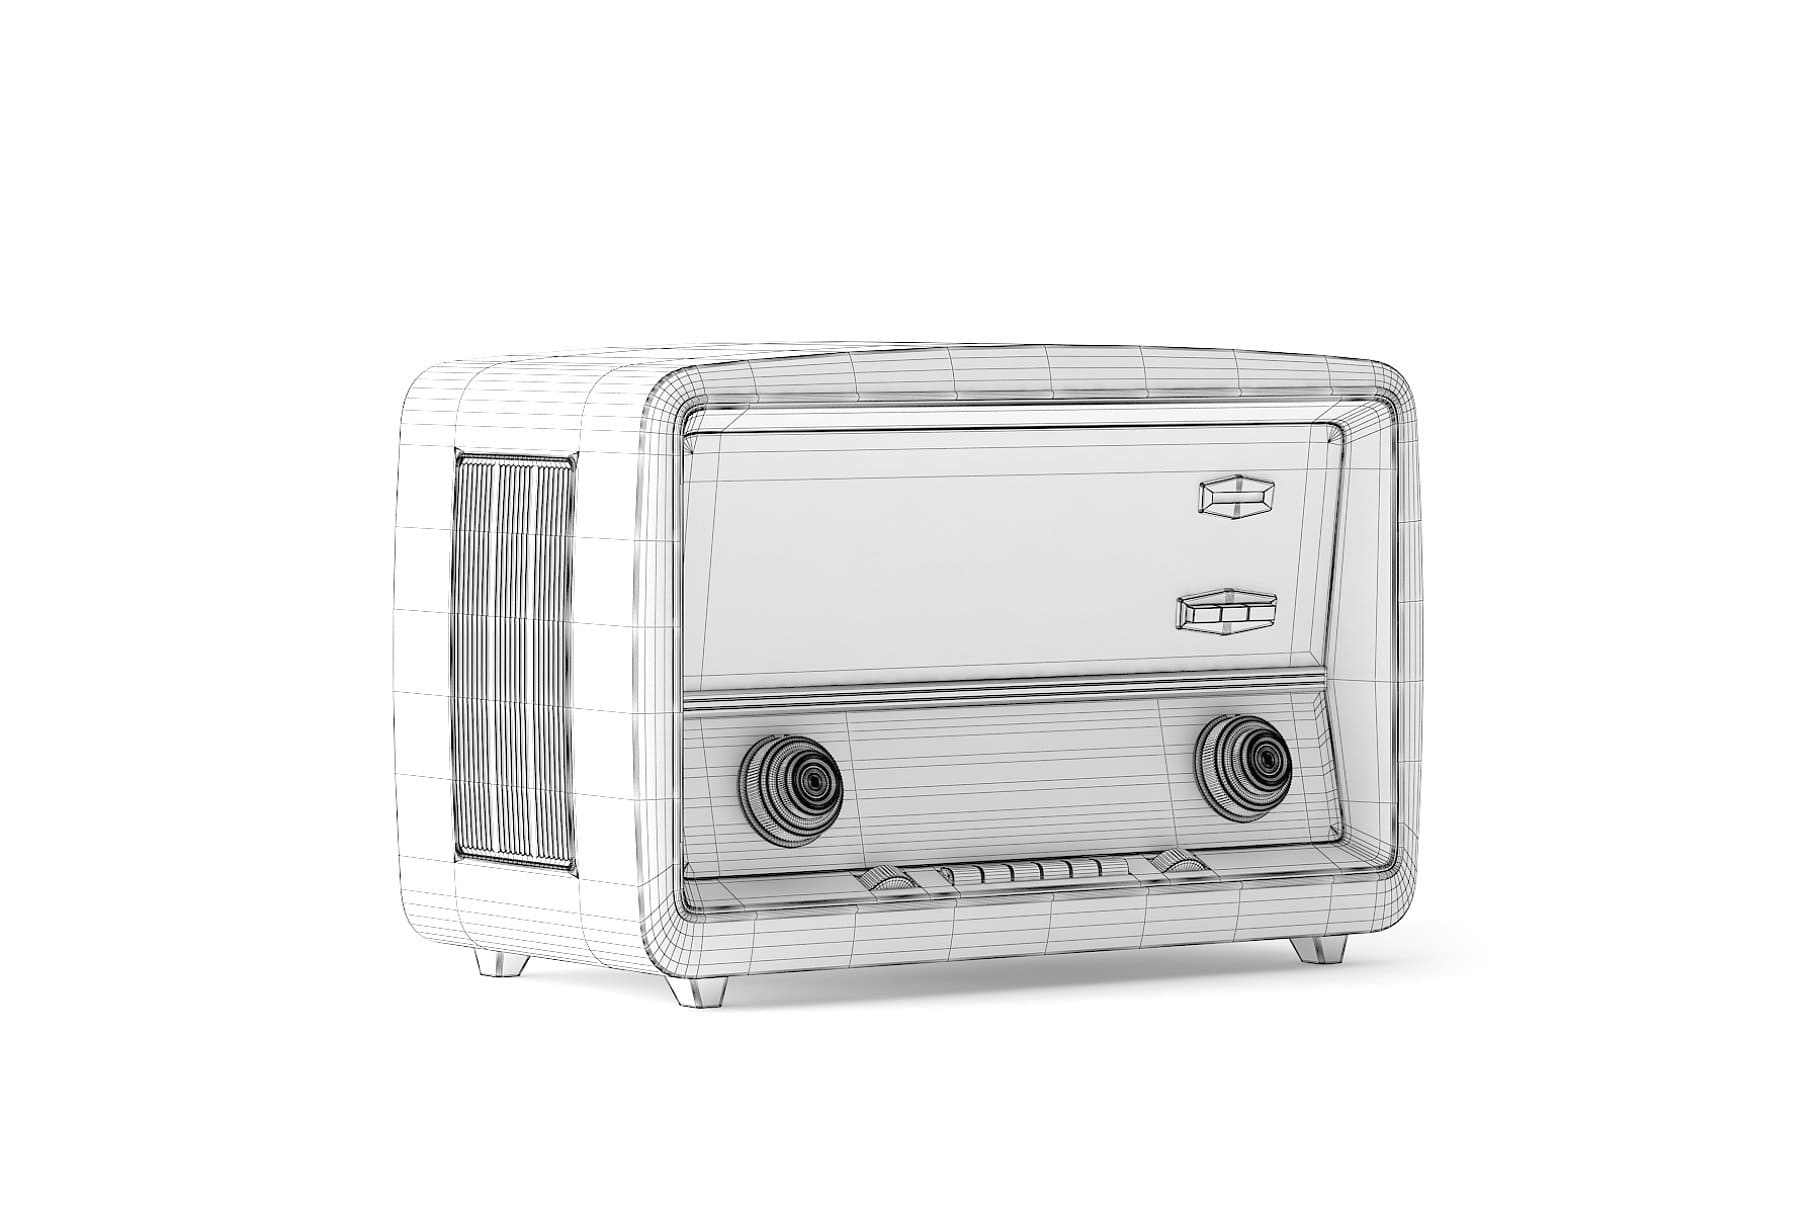 3D model of an antique radio on a white background.